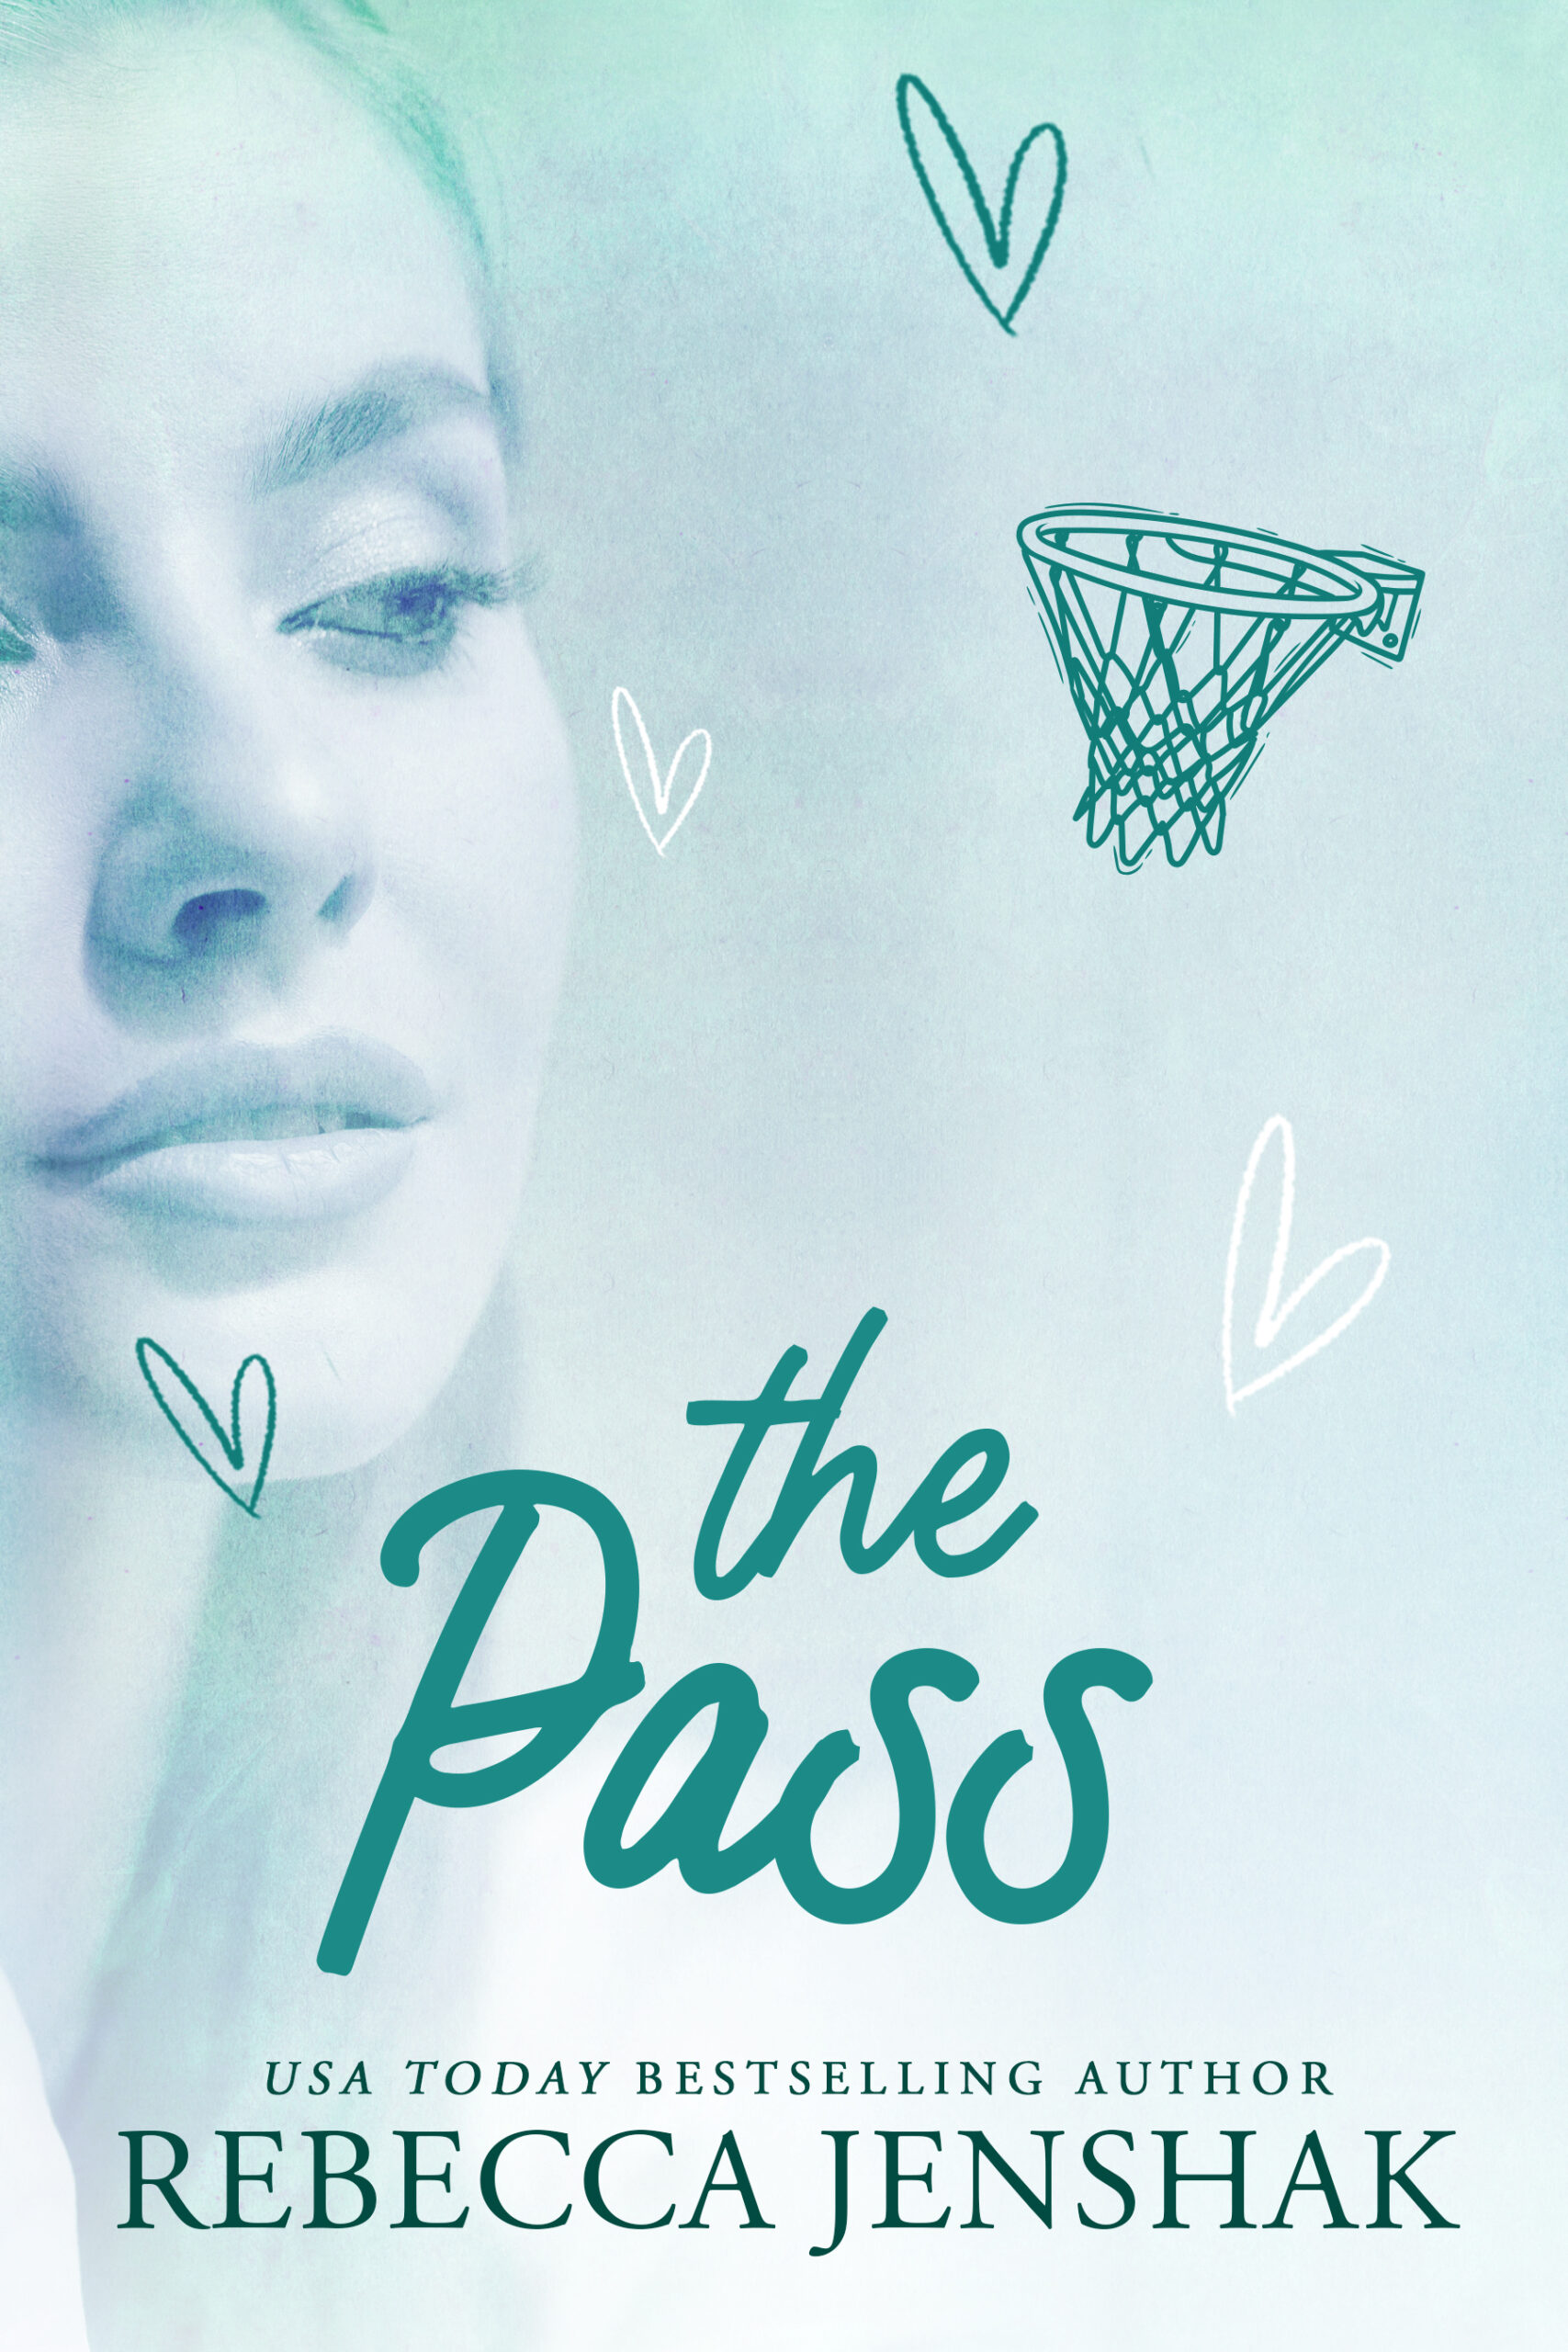 The Pass ebook cover.